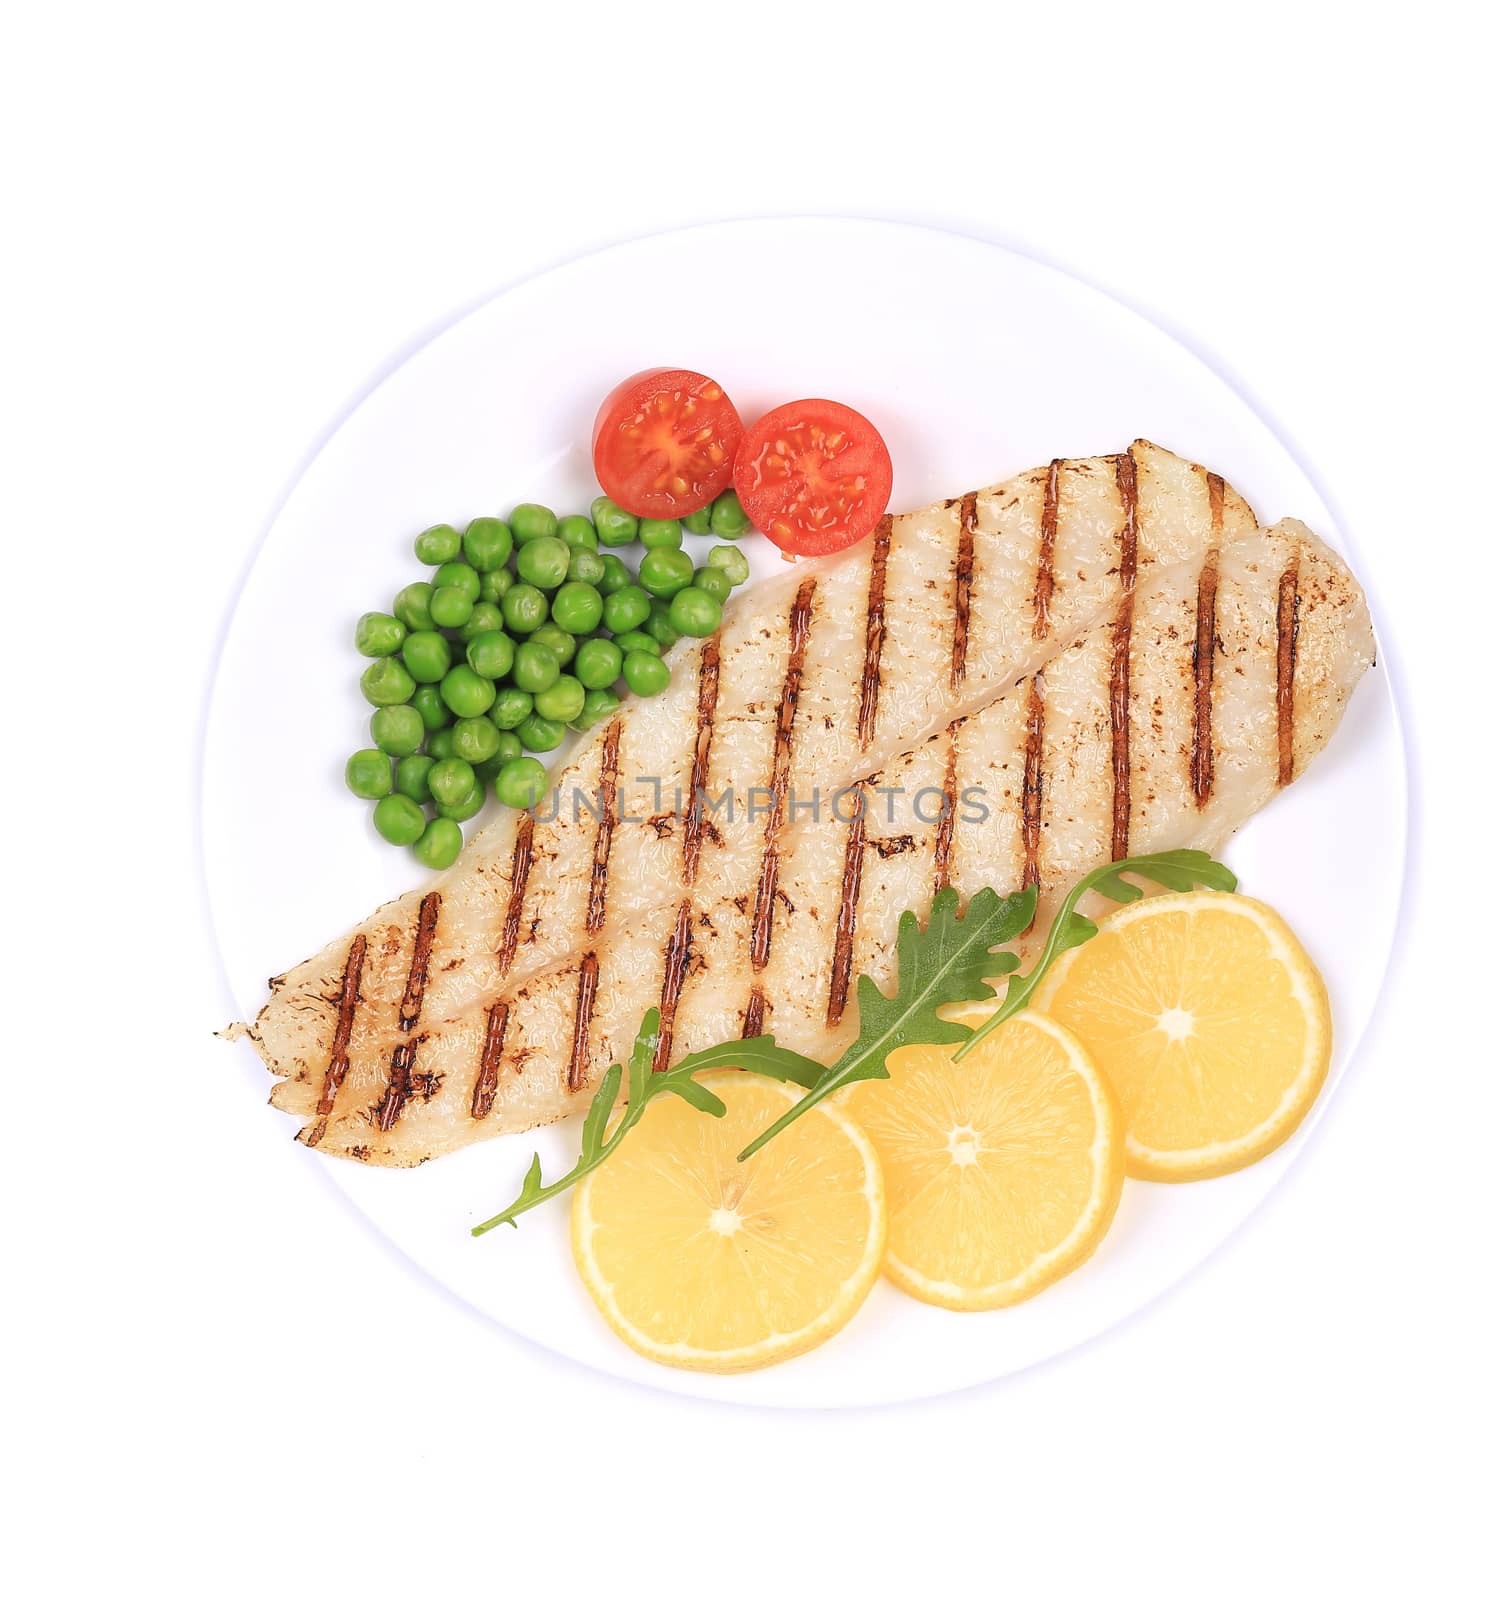 Pangasius fillet on plate. Isolated on a white background.